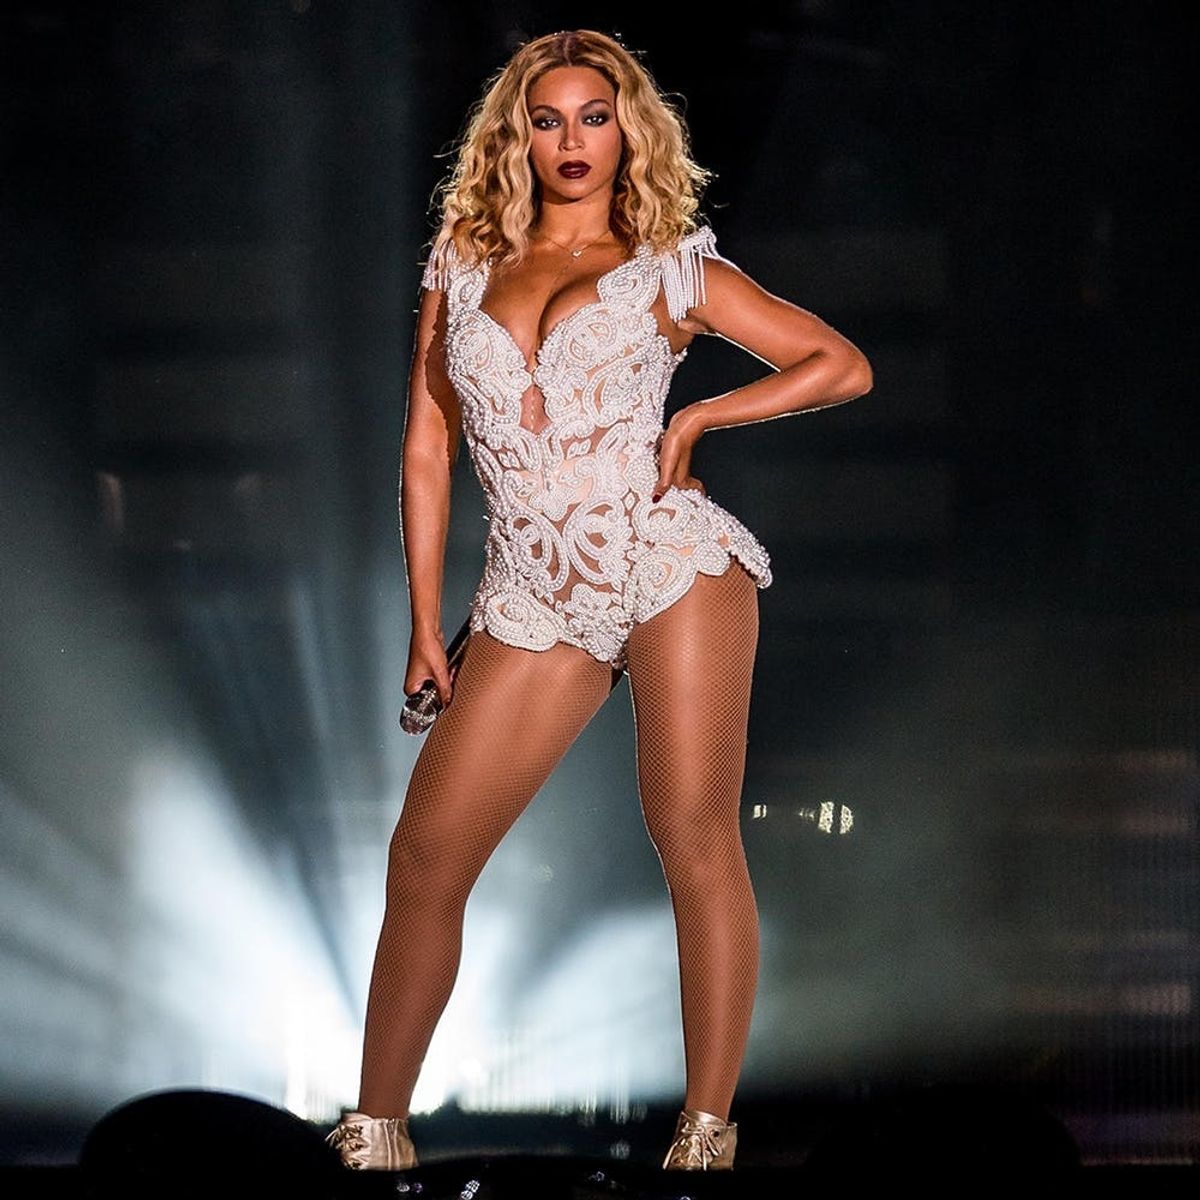 How Beyoncé Responded to the Death of Alton Sterling May Be the Most Surprising Yet